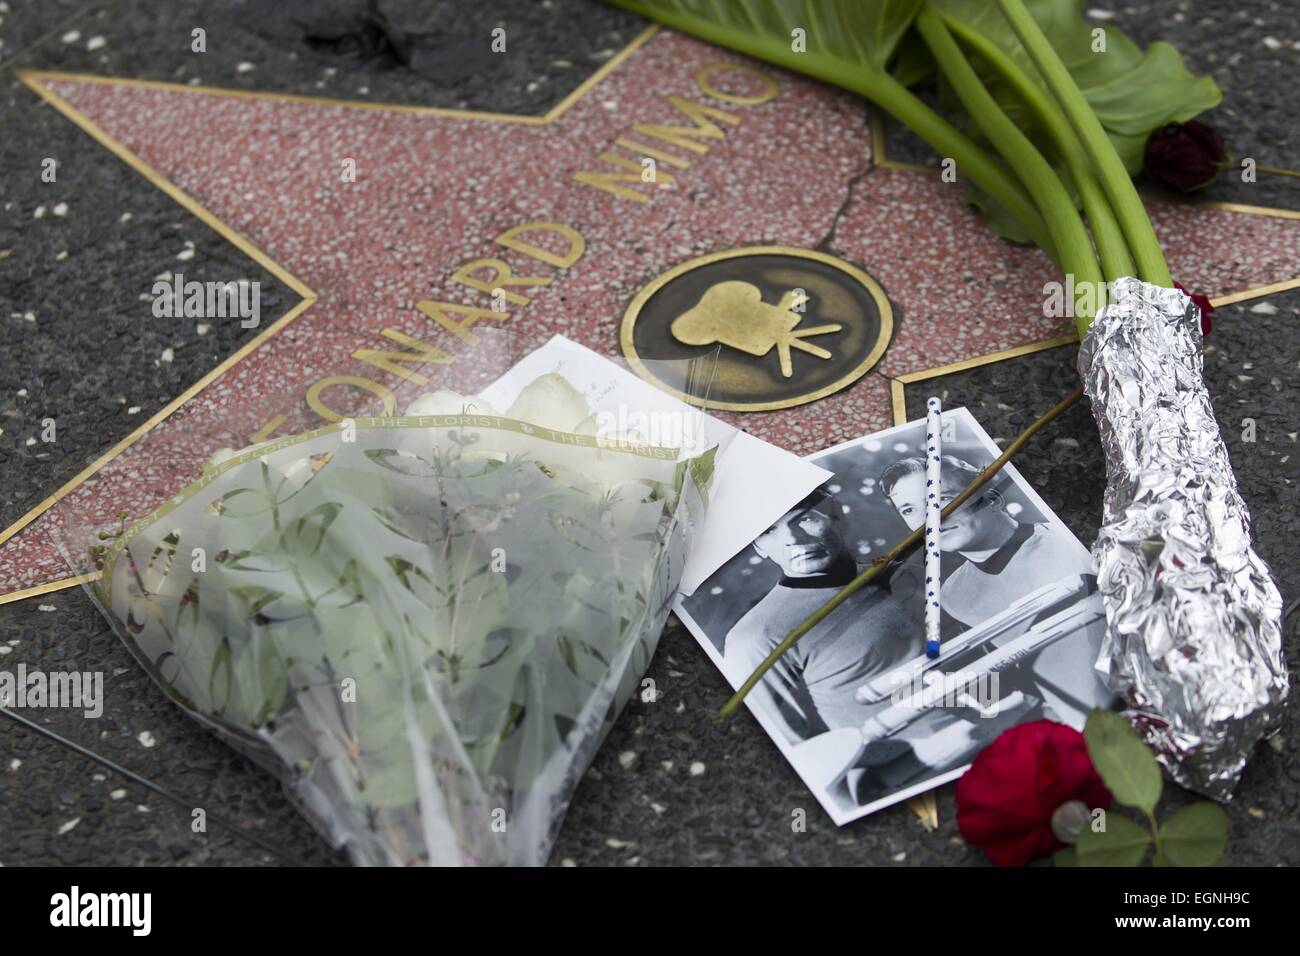 Los Angeles, California, USA. 27th Feb, 2015. People pay their respect with flowers and photographs at the Hollywood Walk of Fame star of Leonard Nimoy. Nimoy, famous for playing Mr. Spock in 'Star Trek' died Friday of end-stage chronic obstructive pulmonary disease. He was 83. © Ringo Chiu/ZUMA Wire/Alamy Live News Stock Photo